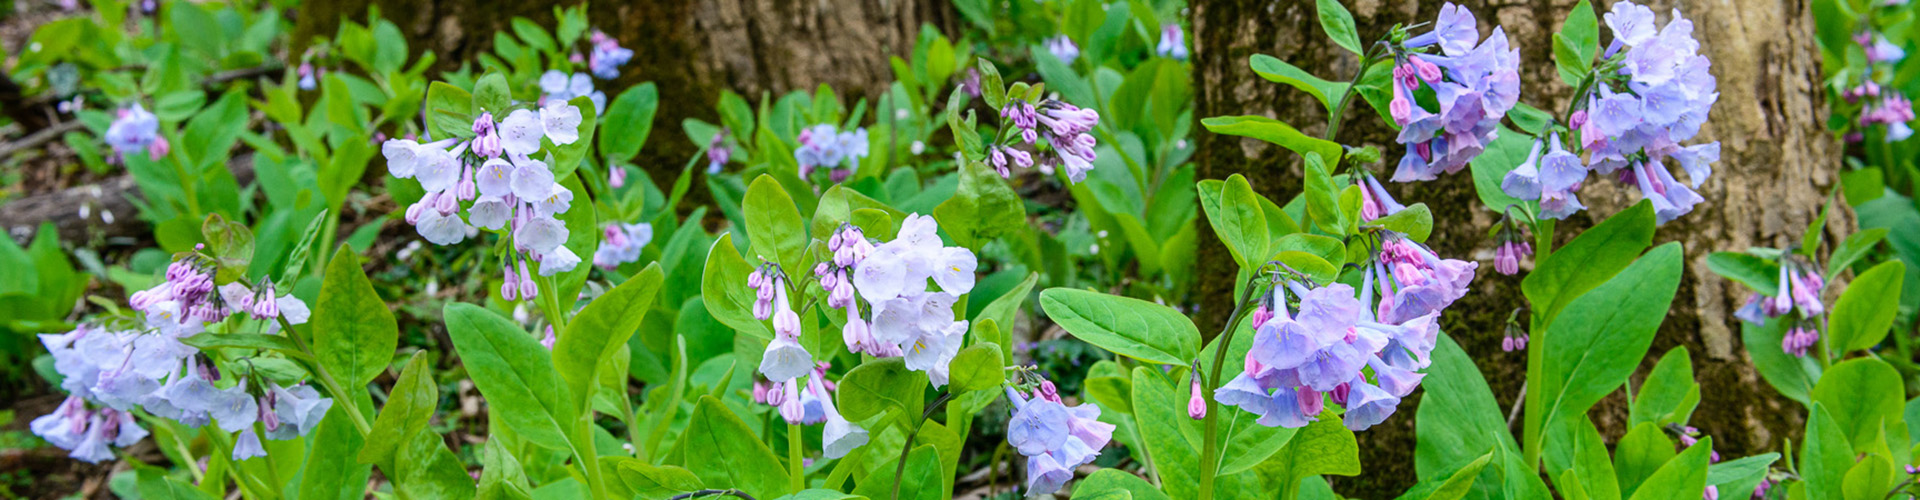 The deep purple foliage of the Virginia bluebells can be found throughout Missouri from mid-spring into mid-summer.